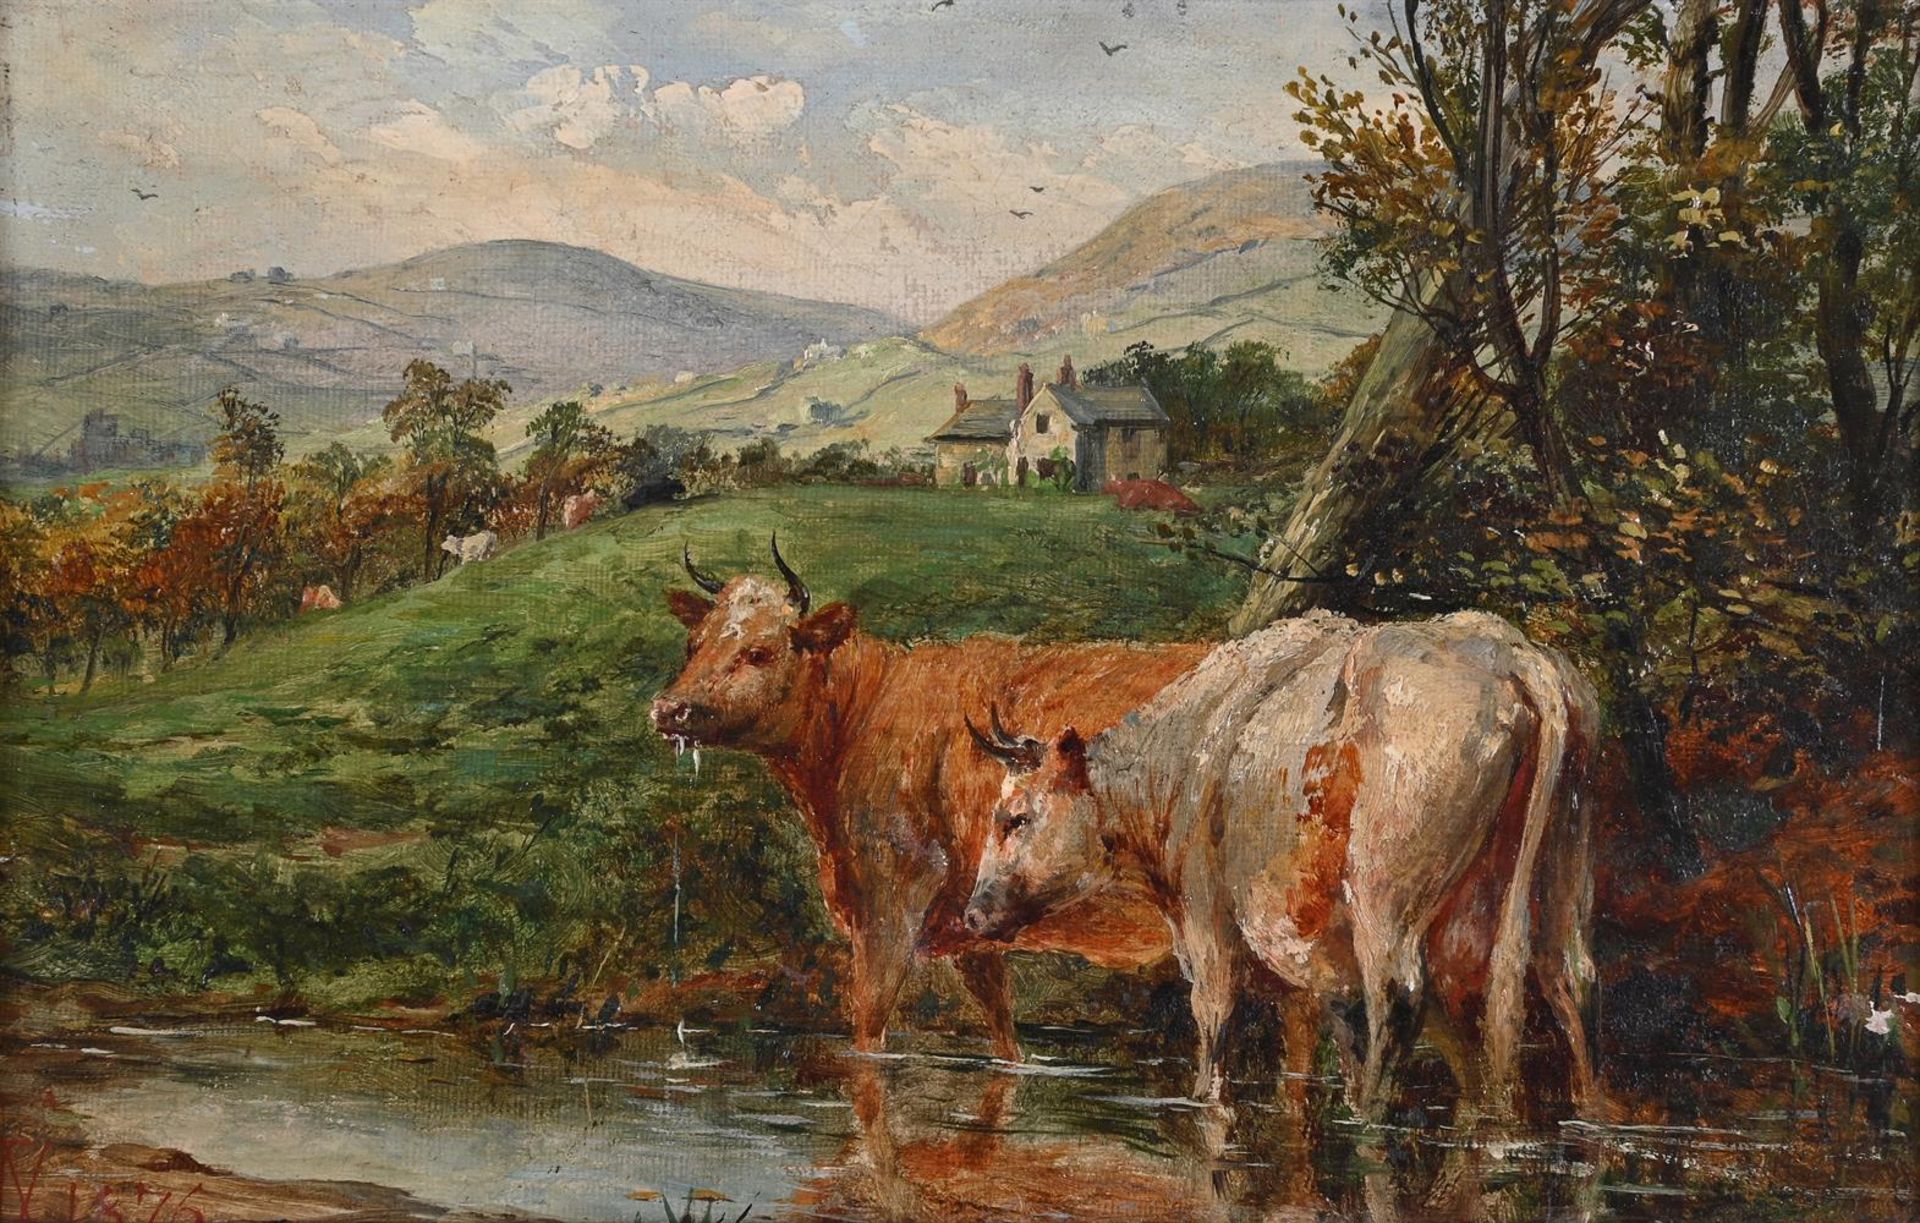 THOMAS FRANCIS WAINWRIGHT (BRITISH 1794-1883), CATTLE IN A LANDSCAPE - Image 2 of 4